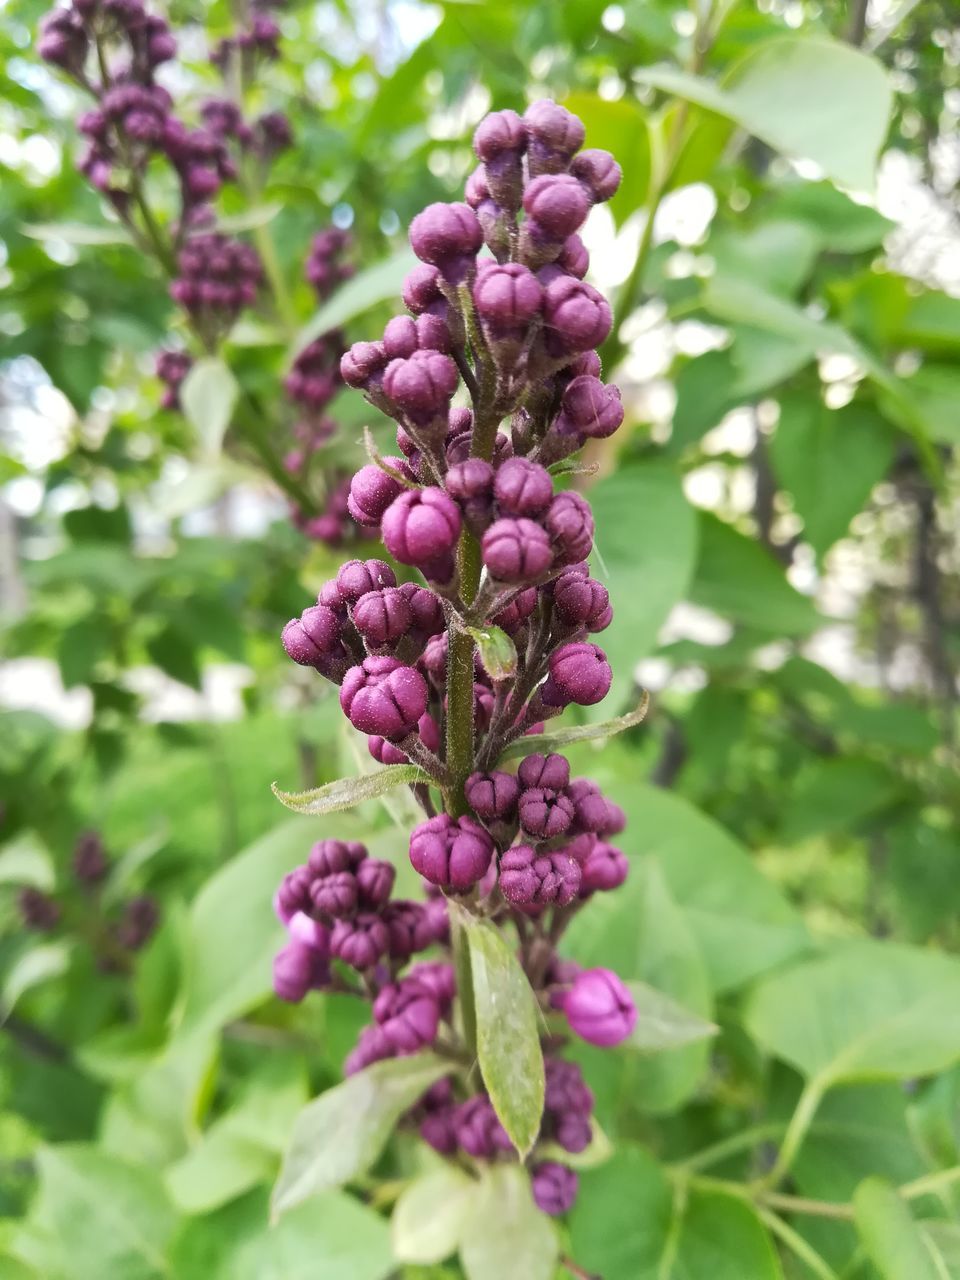 plant, growth, freshness, flower, flowering plant, beauty in nature, purple, day, nature, focus on foreground, plant part, leaf, vulnerability, no people, close-up, fragility, pink color, green color, selective focus, outdoors, lilac, maroon